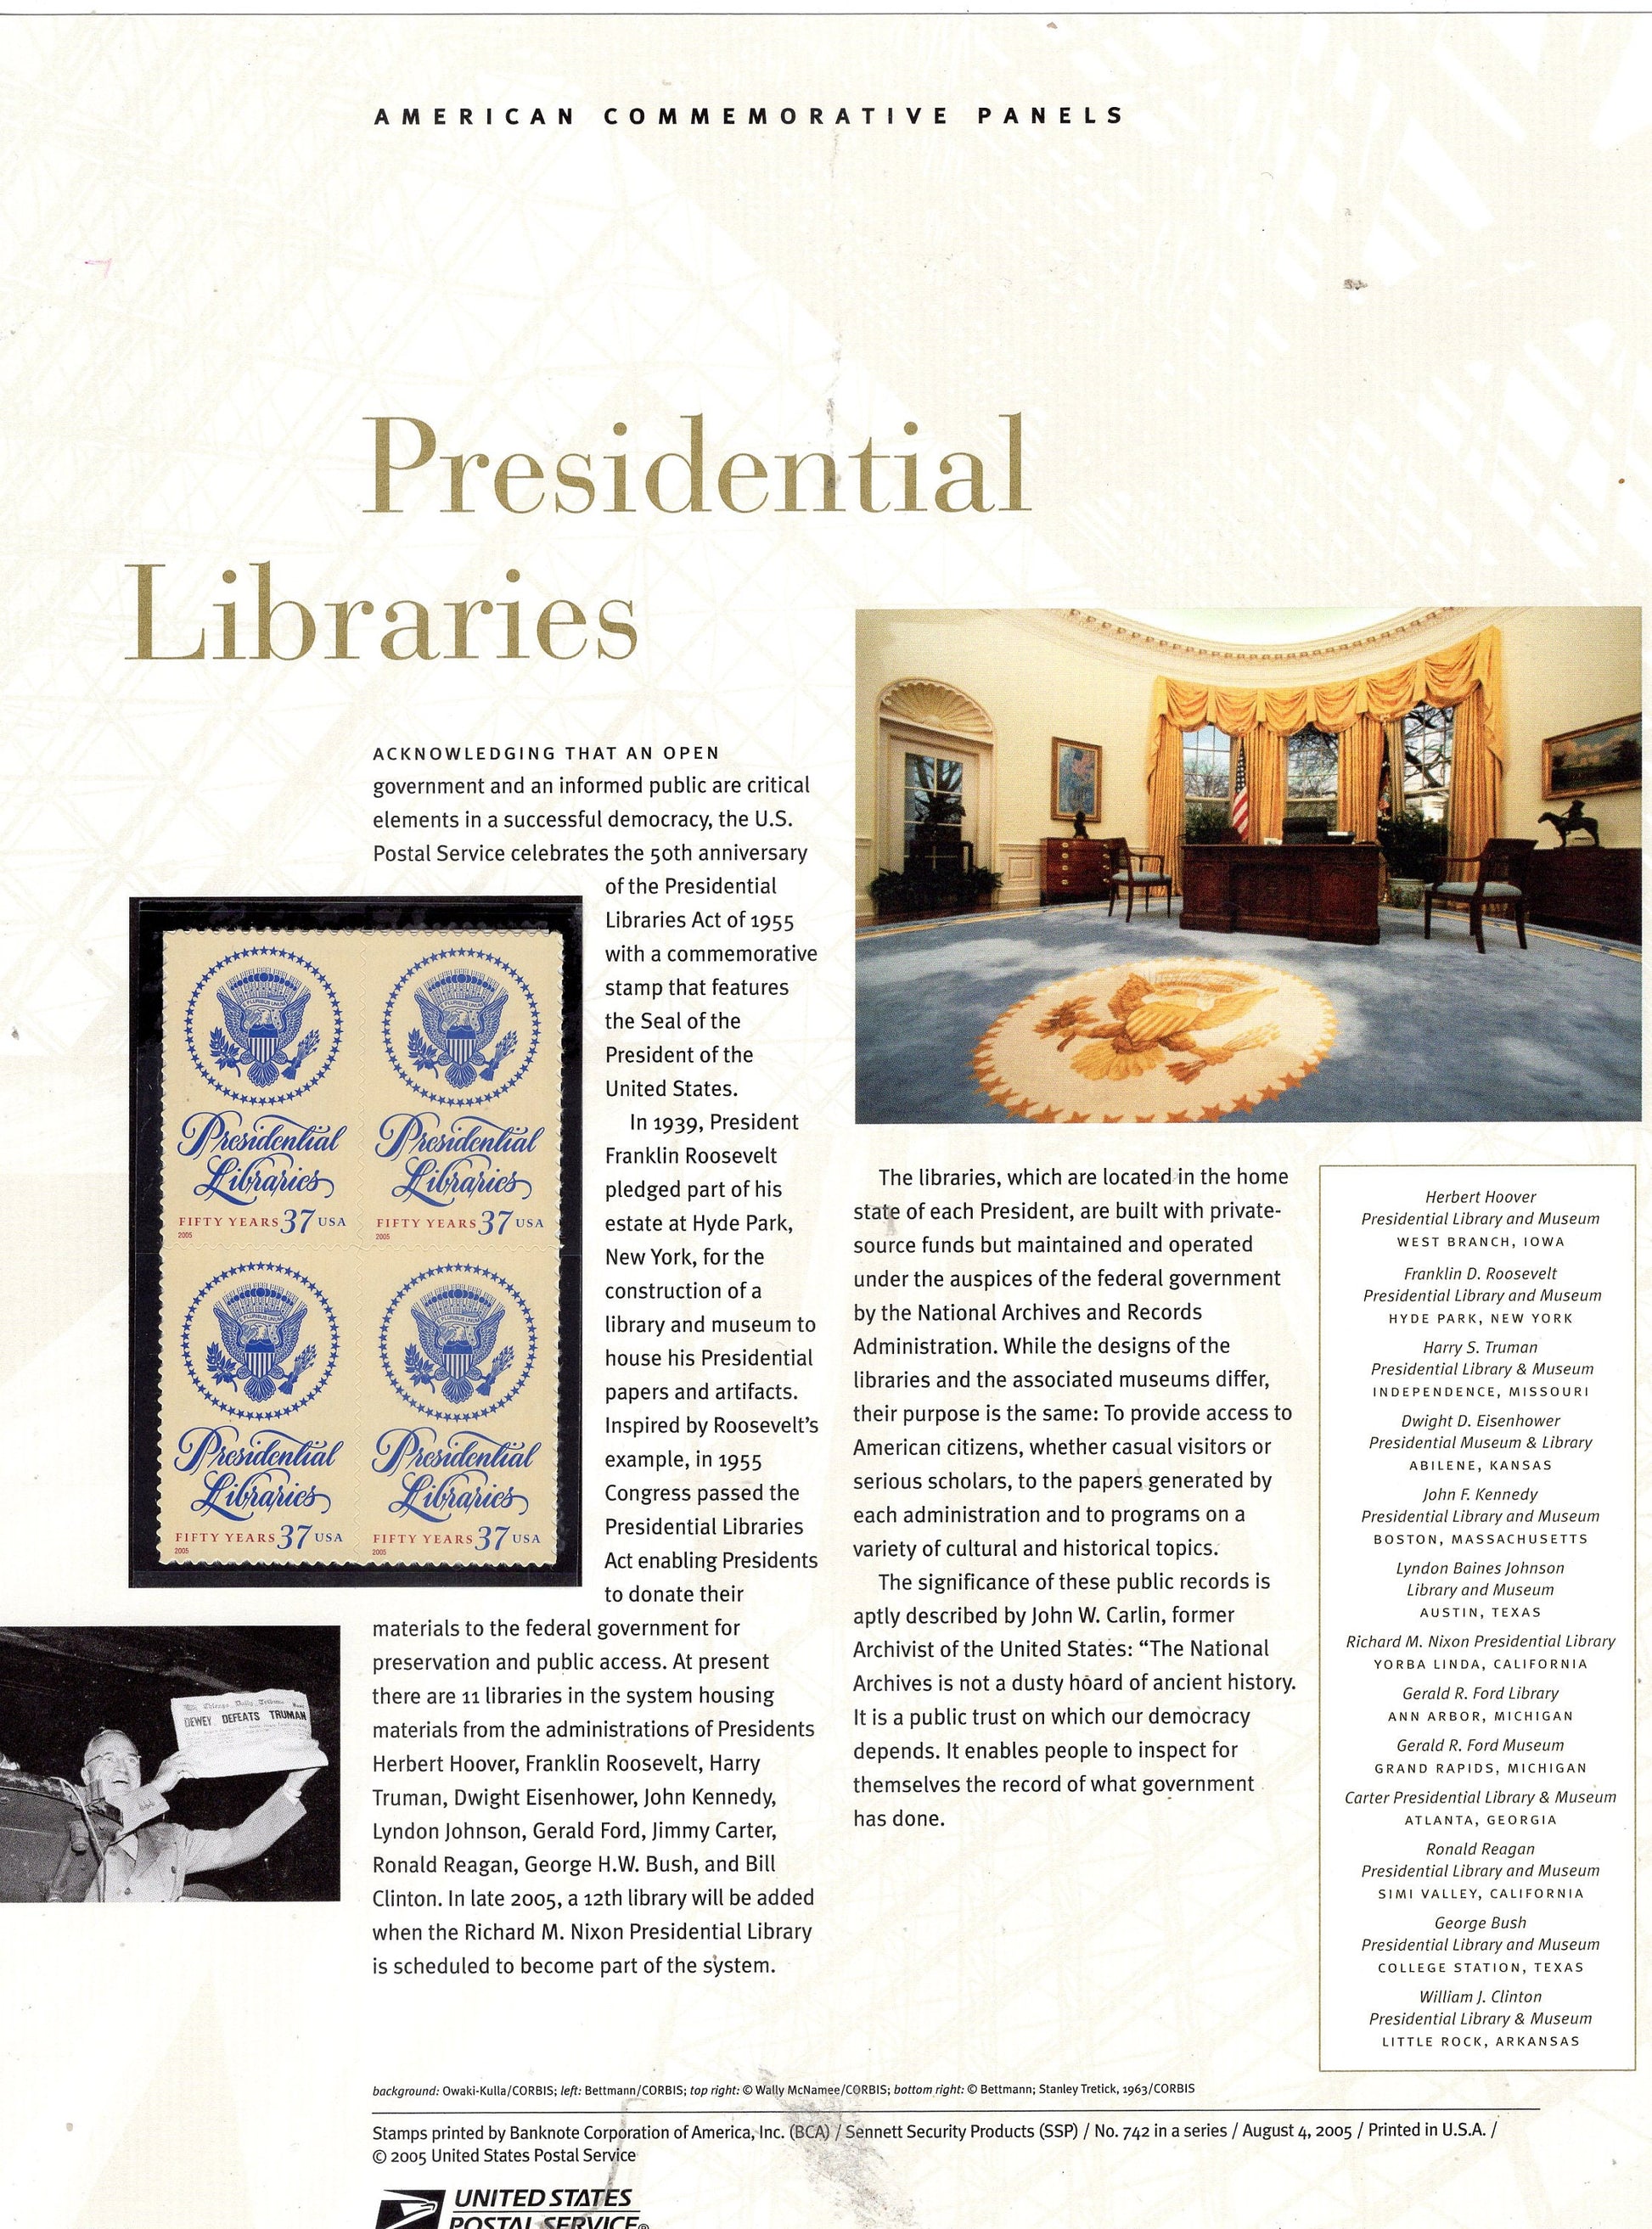 PRESIDENTIAL LIBRARY LIBRARIES Commemorative Panel with a Block of 4 Stamps Illustrations plus Text – A Great Gift 8.5x11 - Issued in 2005 #742-